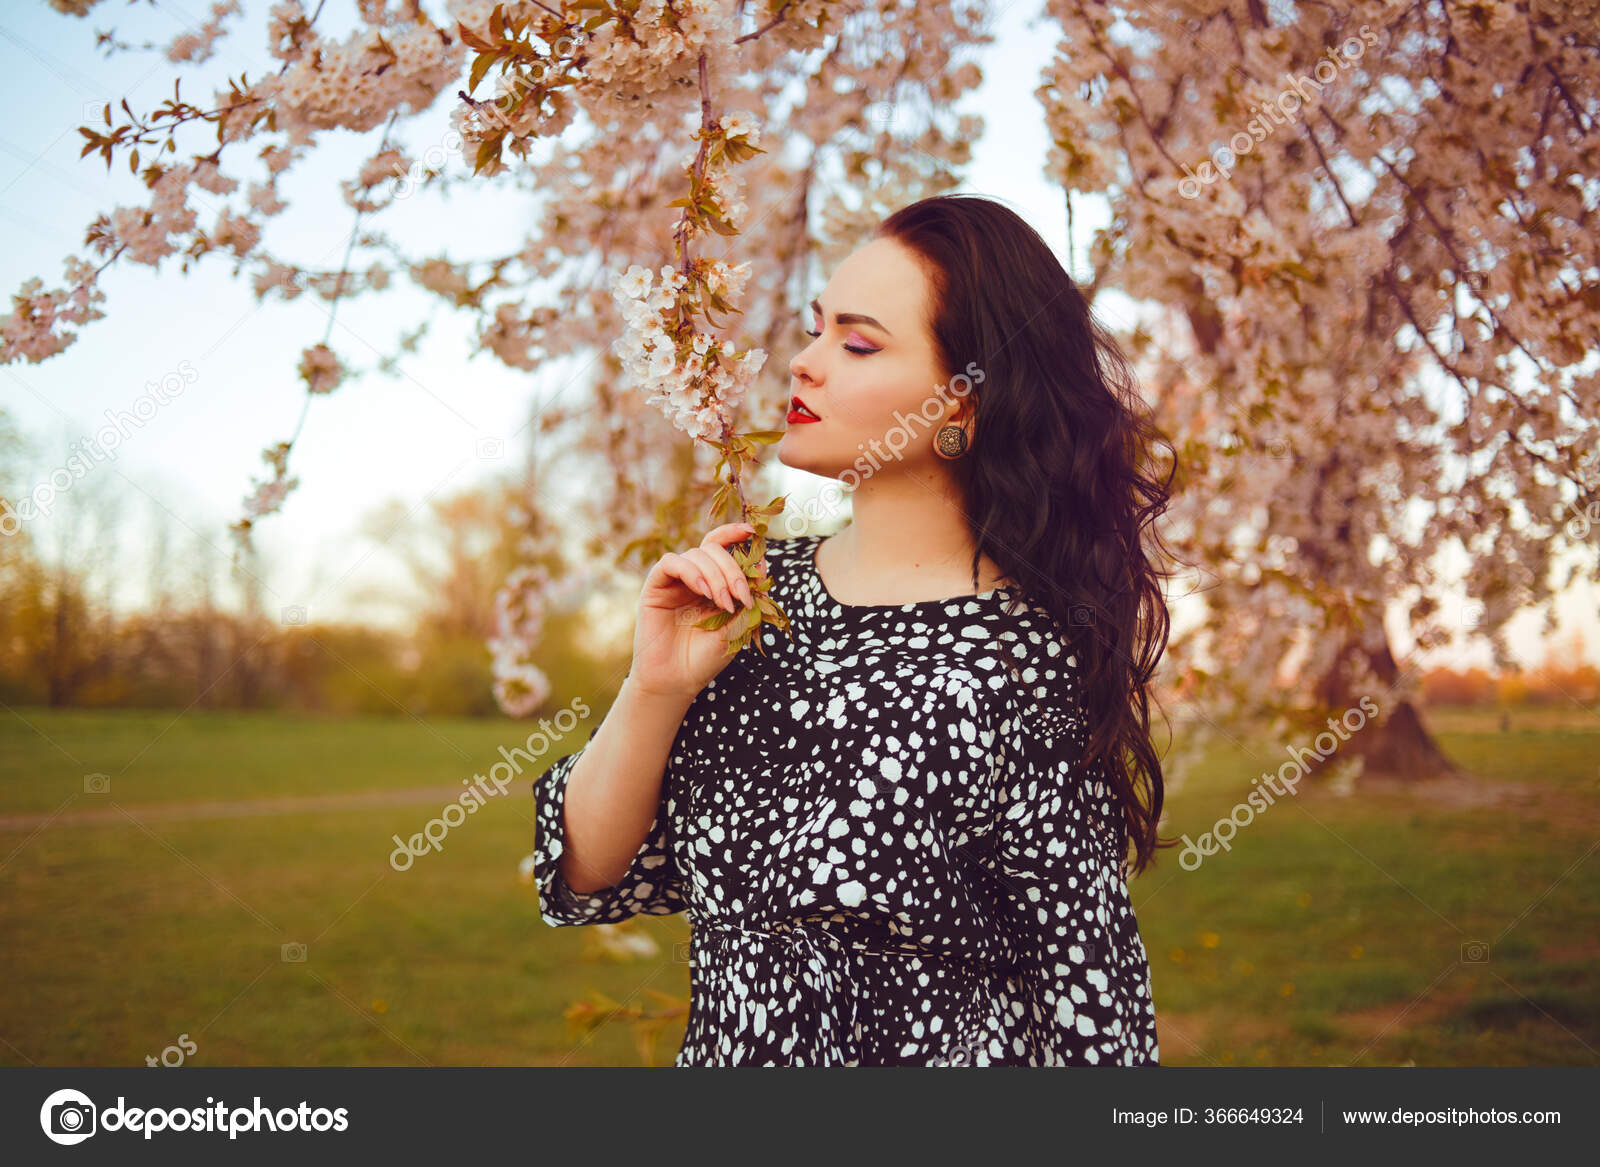 Calm adult pregnant woman practicing yoga while sitting in pose lotus on  ground in park — Lotus Pose, mother - Stock Photo | #313130550